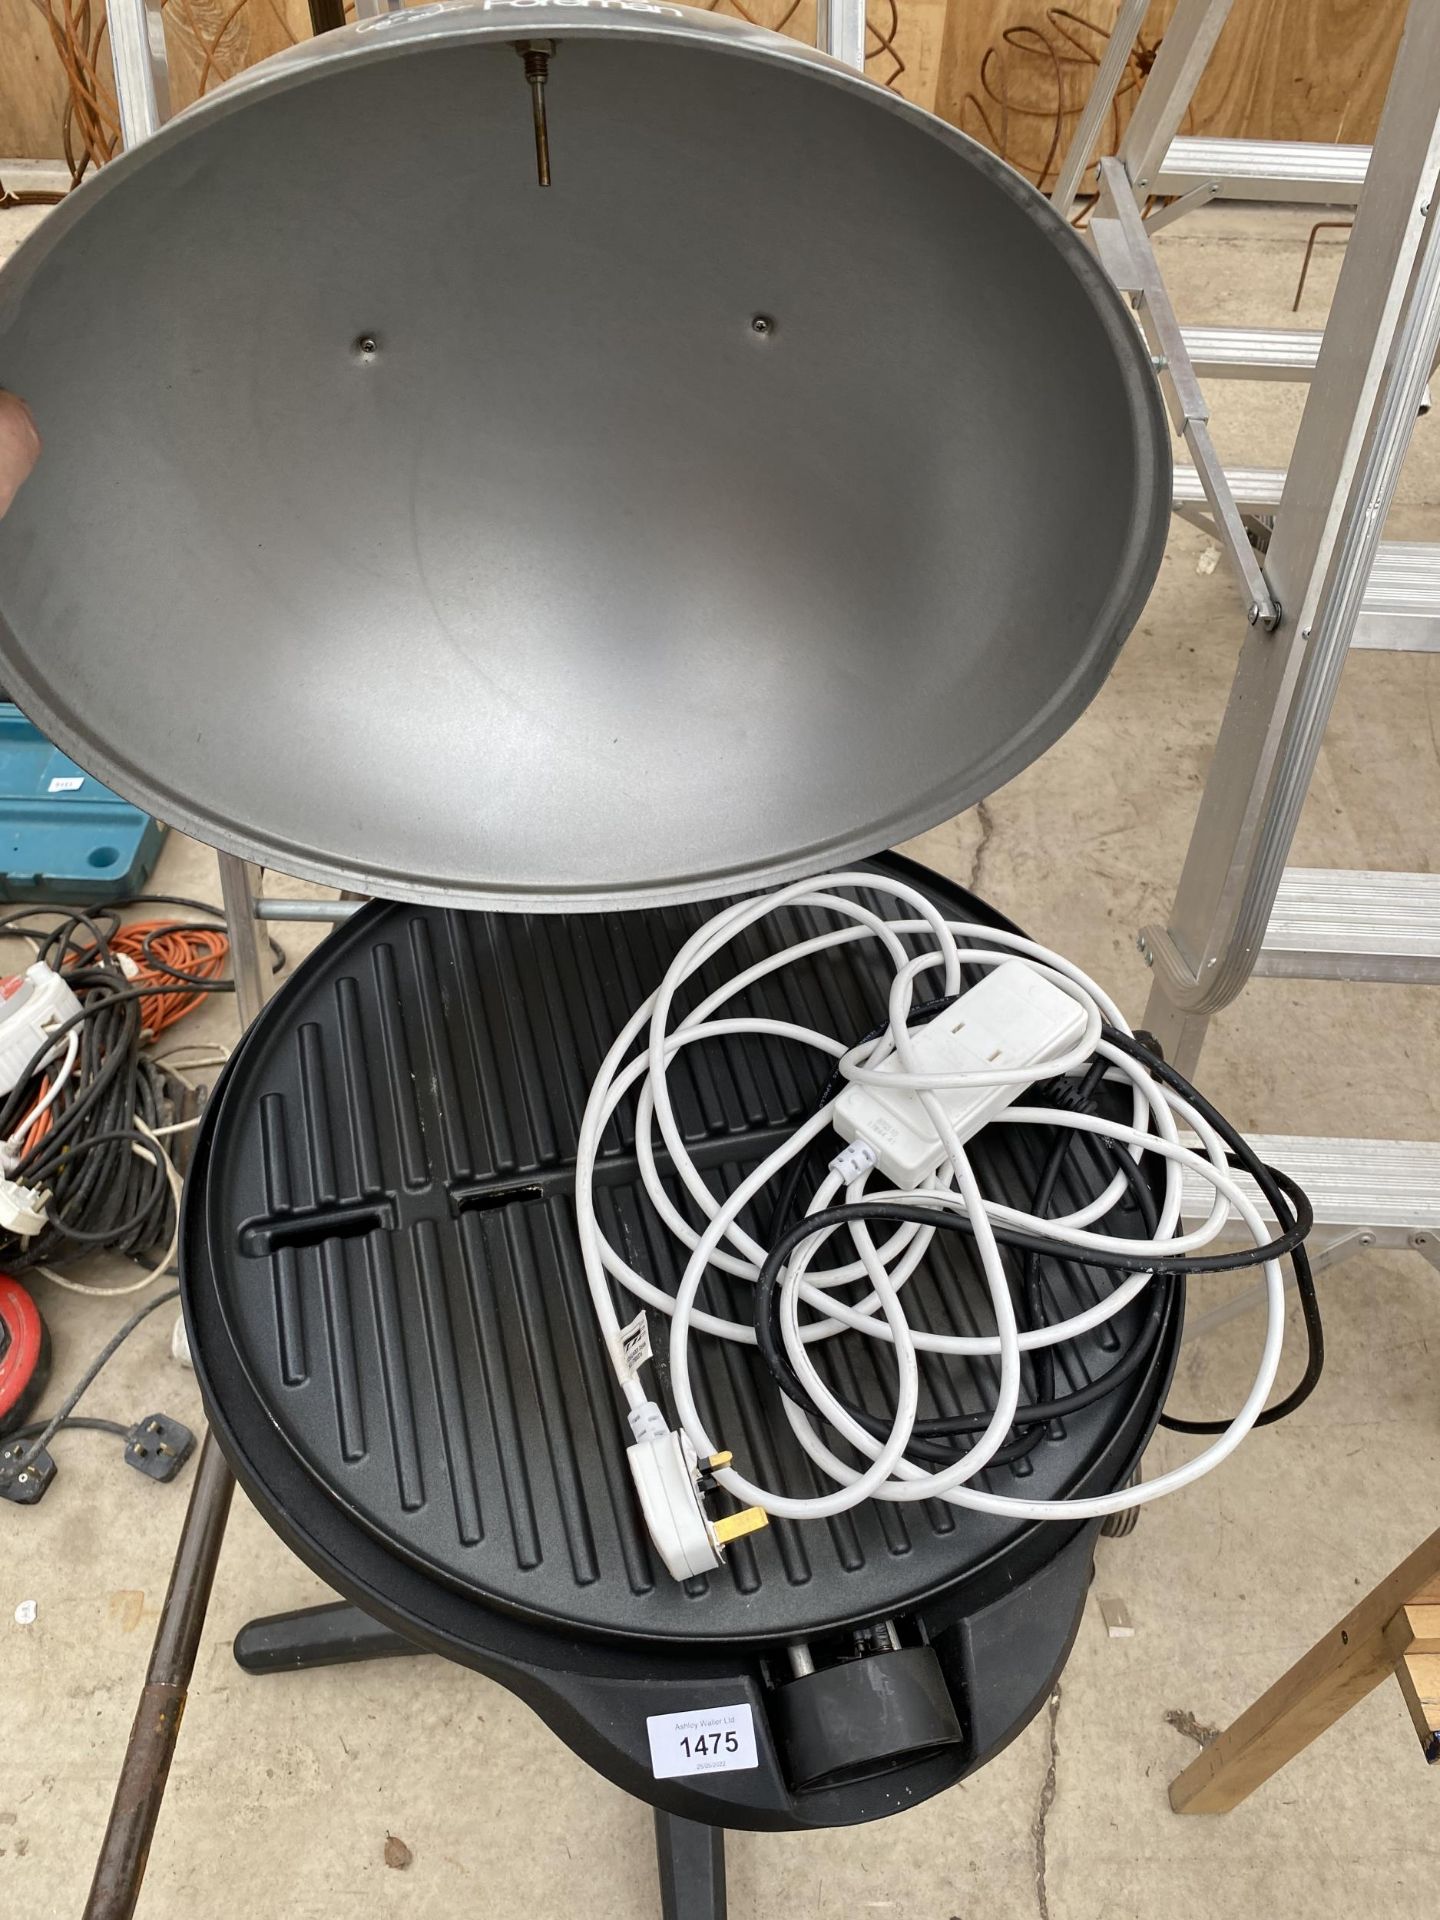 A GEORGE FORMAN ELECTRIC BBQ/GRILL - Image 2 of 5